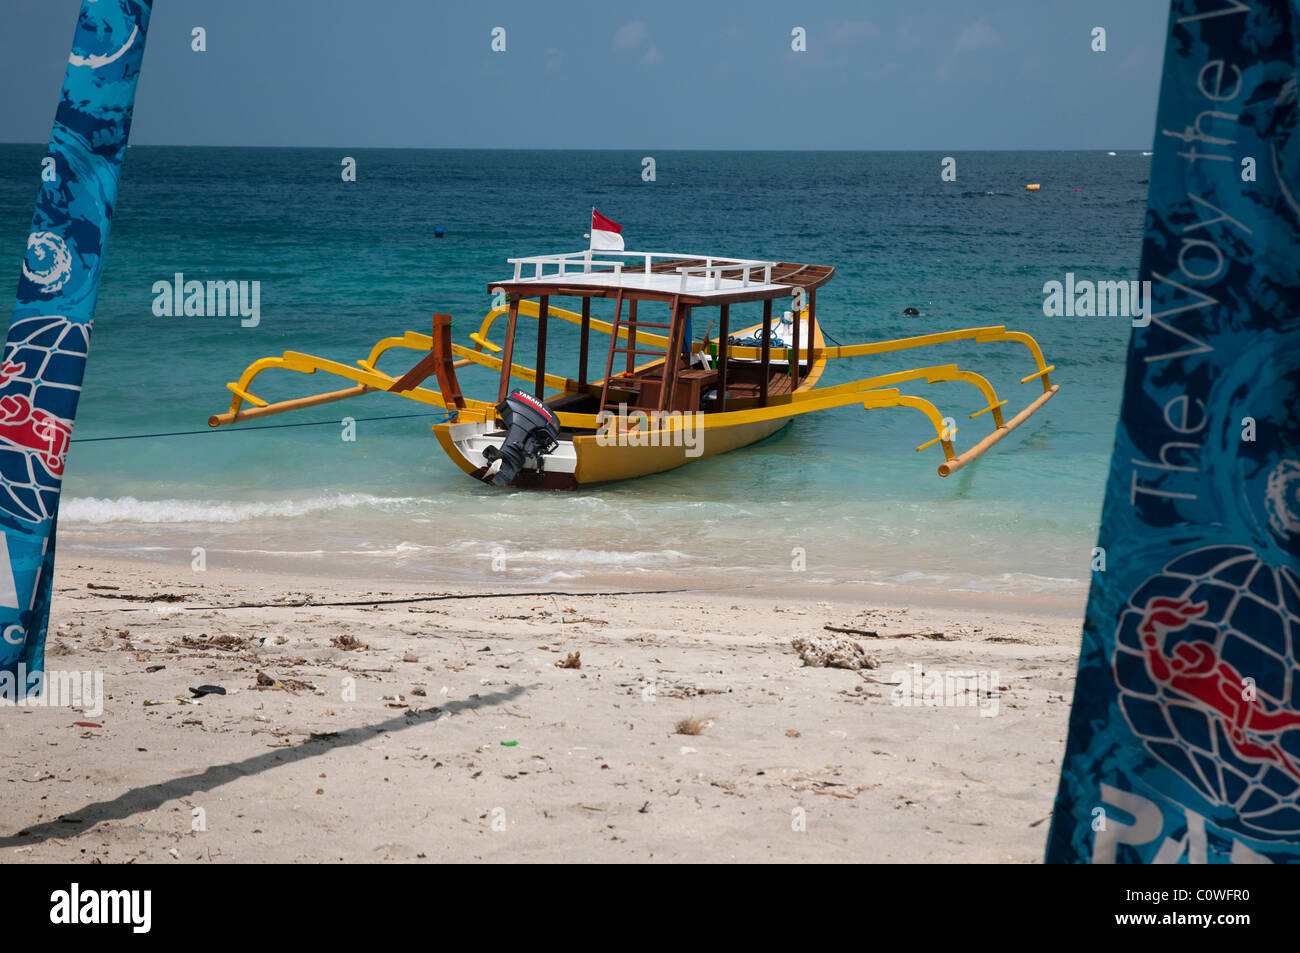 Brightly painted glass bottomed dive boat on the beach at Gili Trawangan a small island off Lombok, Indonesia Stock Photo